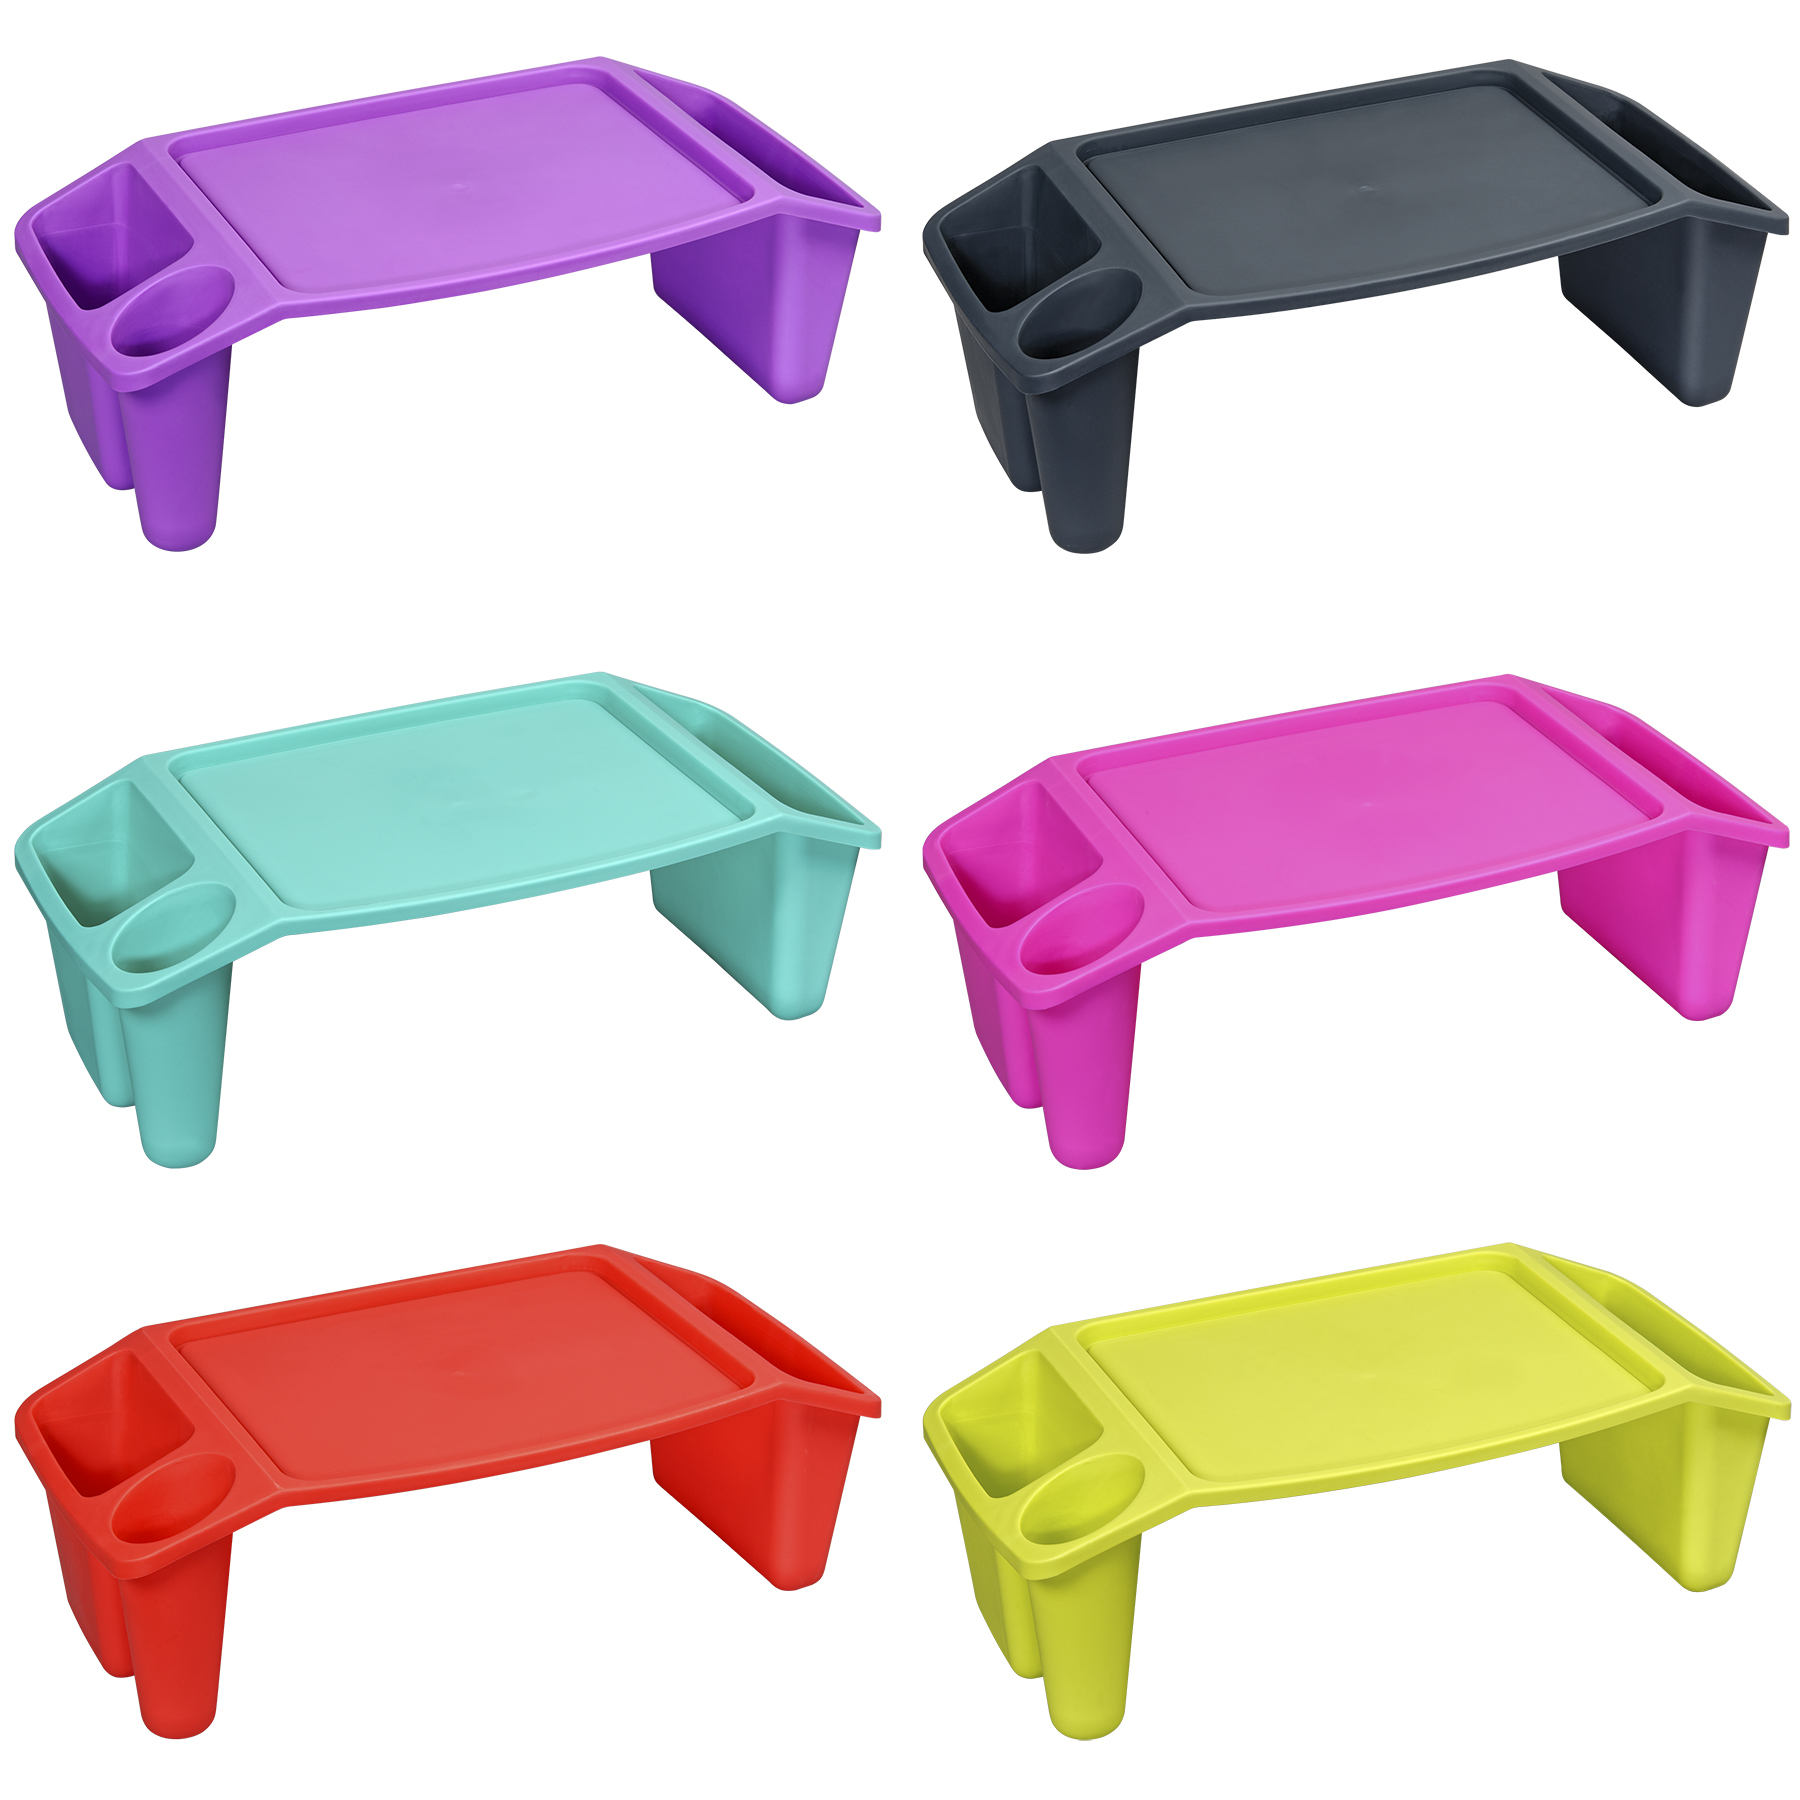 Shop for the Ankyo Development Kids Lap Tray, Assorted at